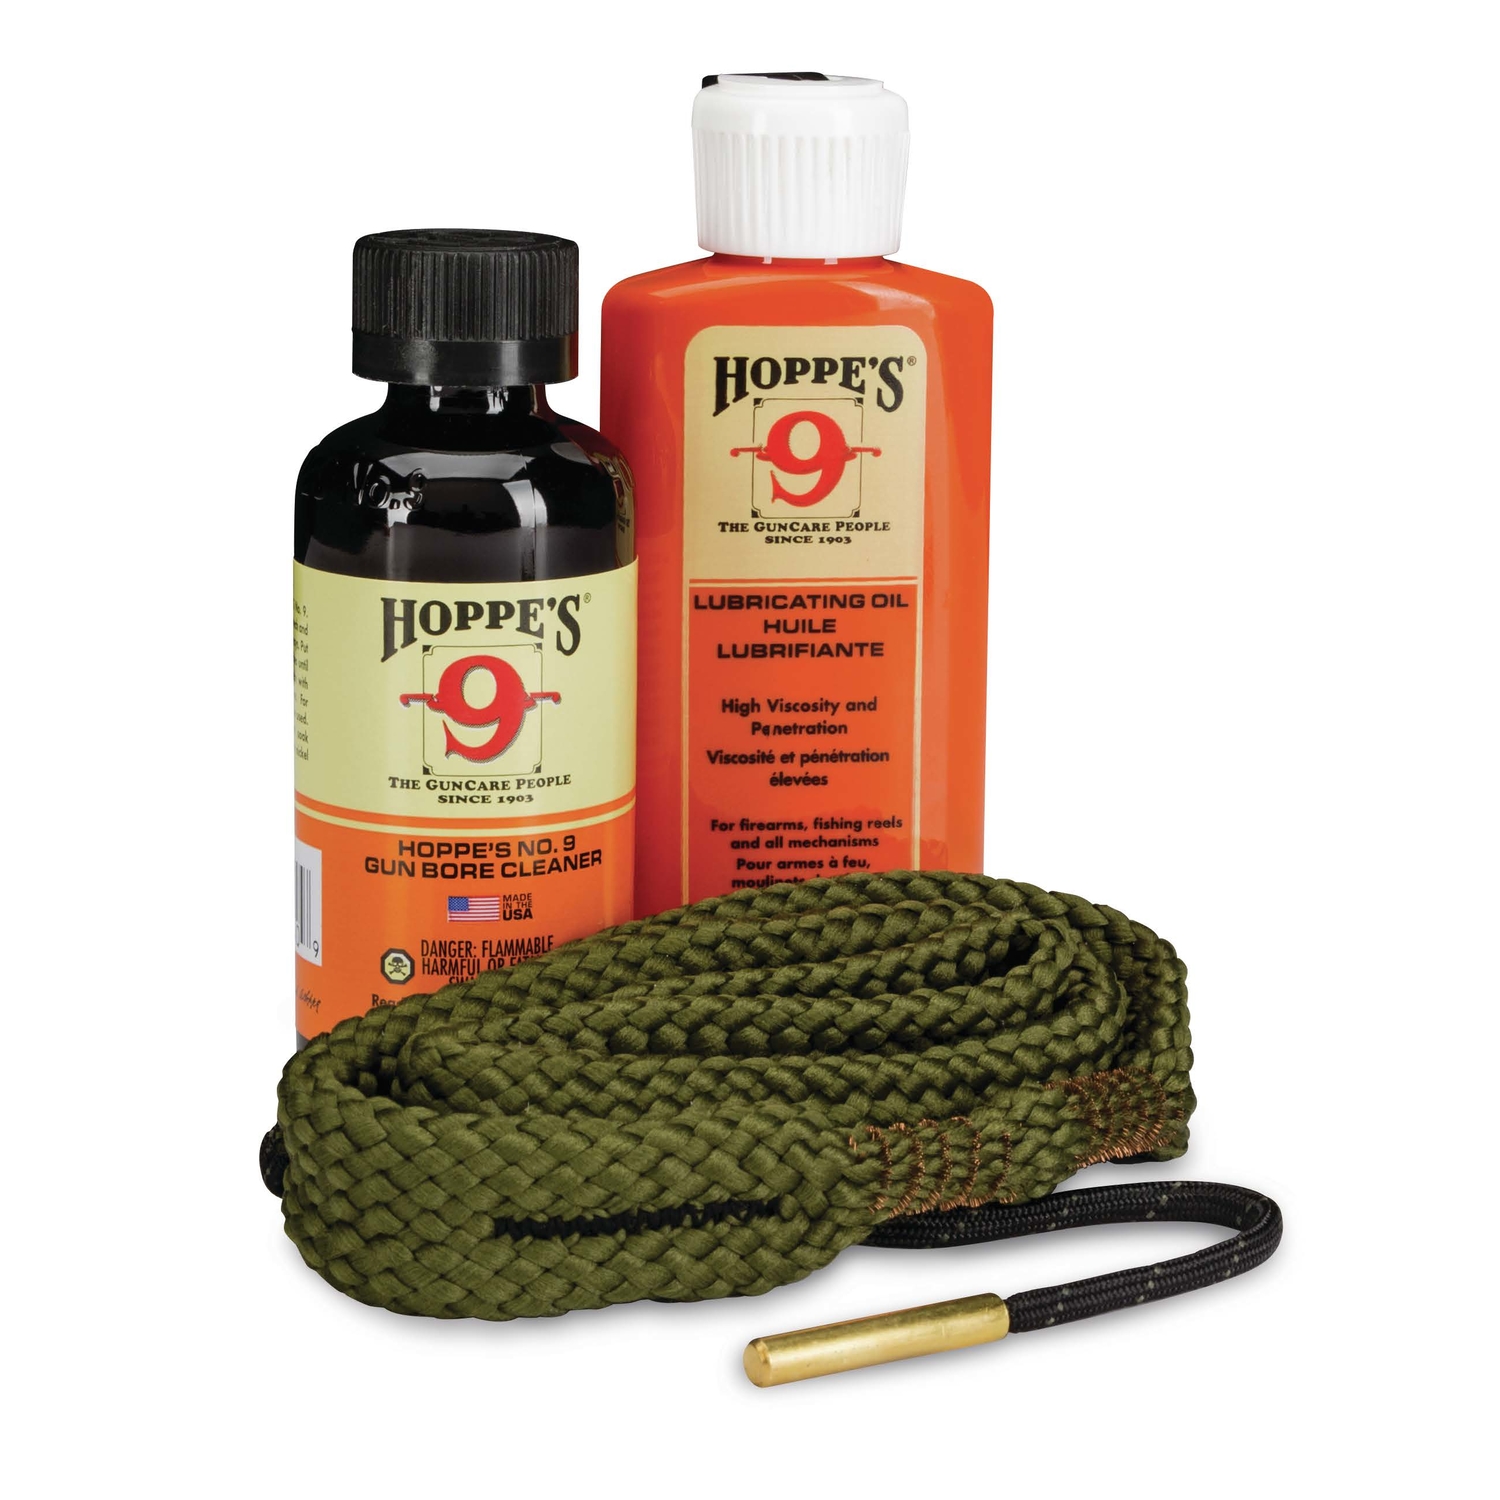 Photos - Other sporting goods Hoppes Hoppe's No. 9 1-2-3 Done Pistol Gun Cleaning Kit 3 pc 110022 